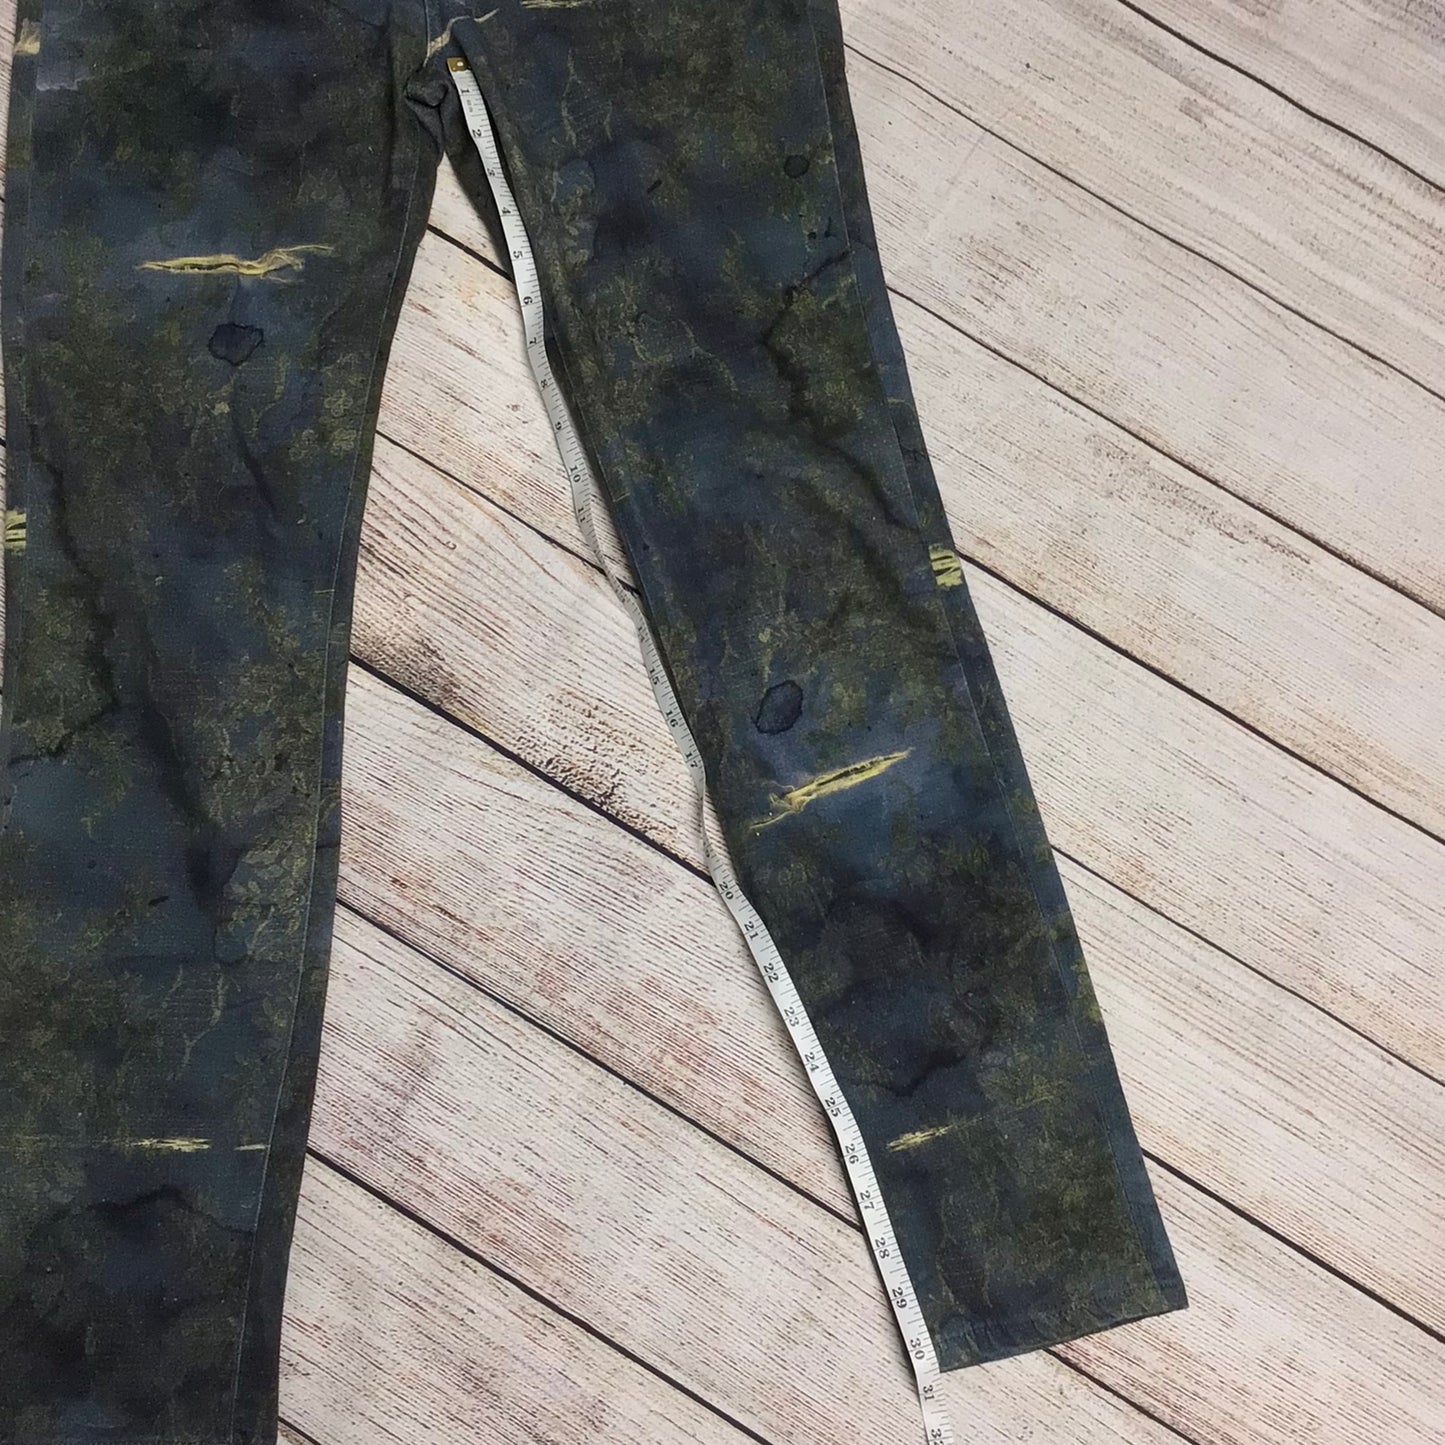 Vivienne Westwood Anglomania Green & Blue Rough Paisley Print Jeans w/Rips Size W30 L33